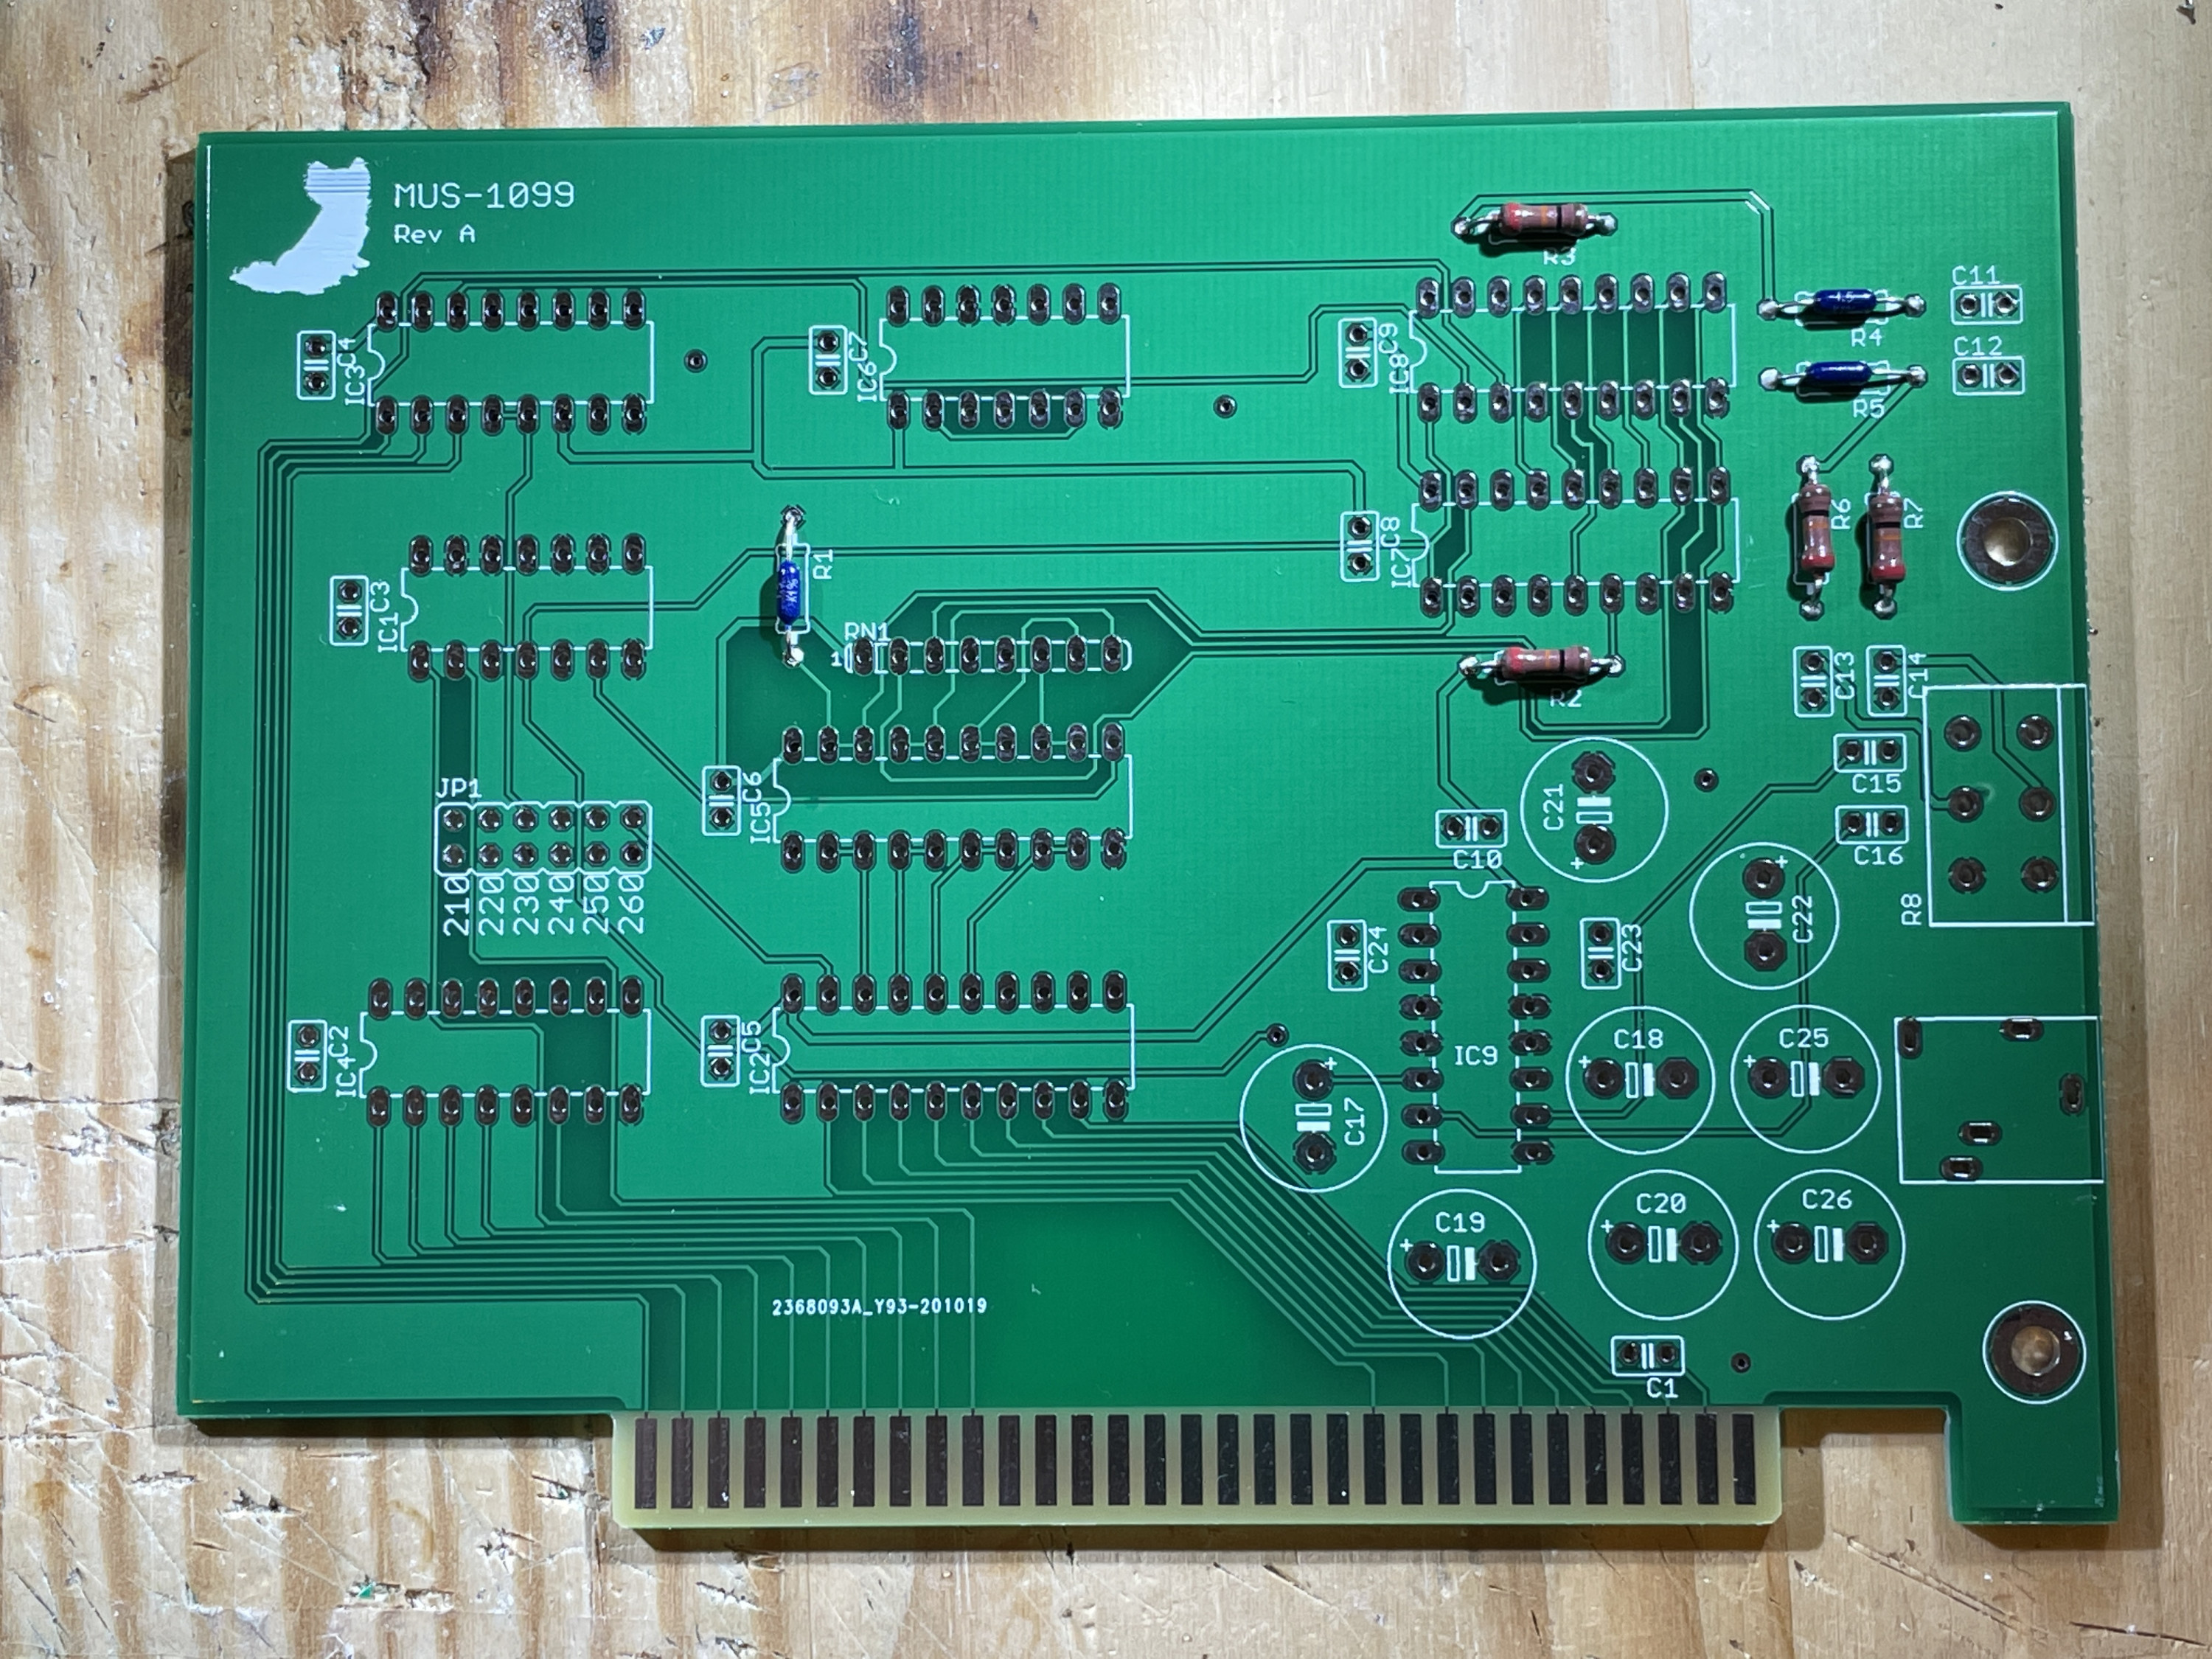 MUS-1099 PCB with resistors added